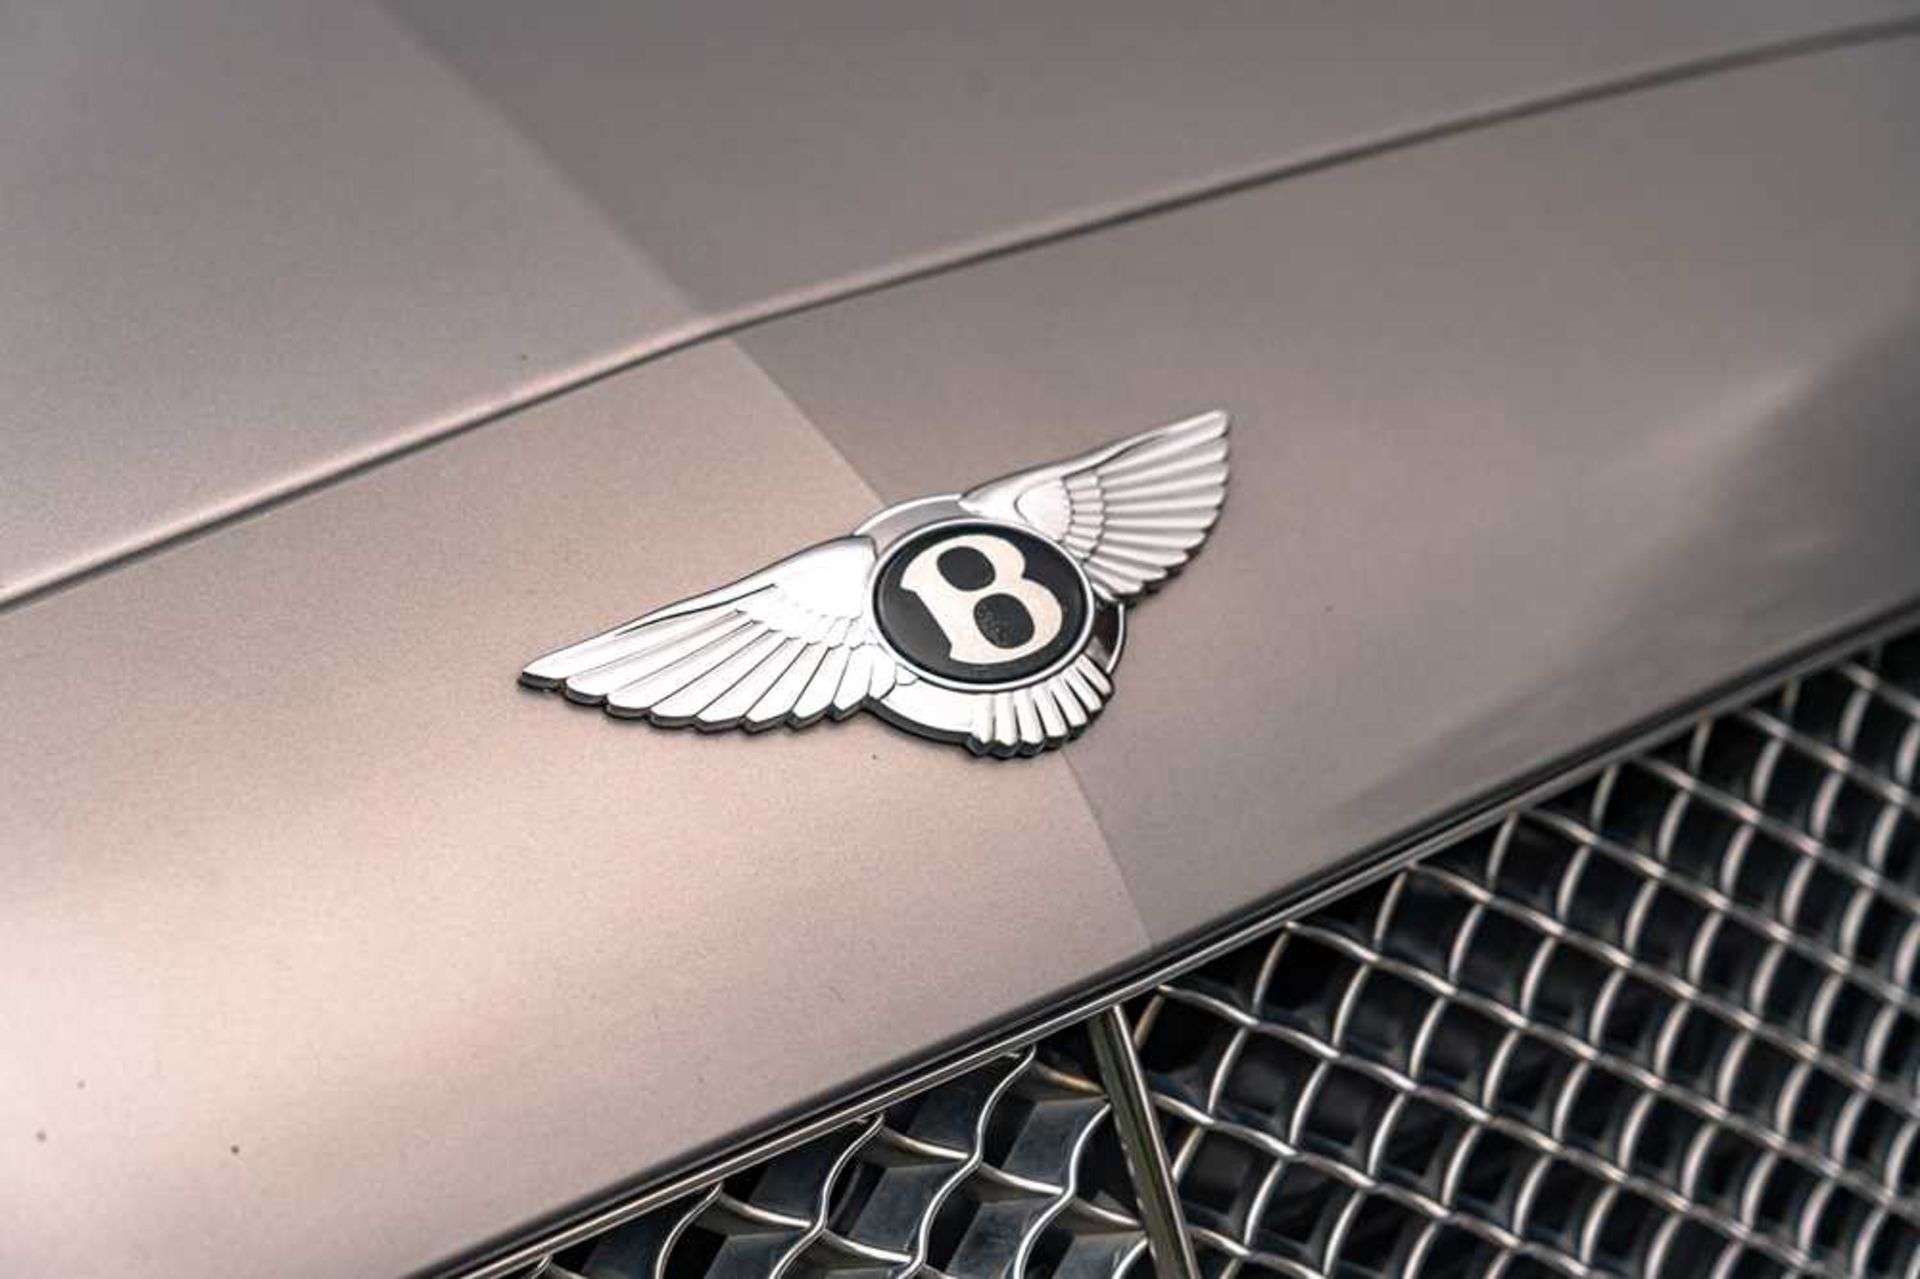 2005 Bentley Continental Flying Spur - Image 11 of 58